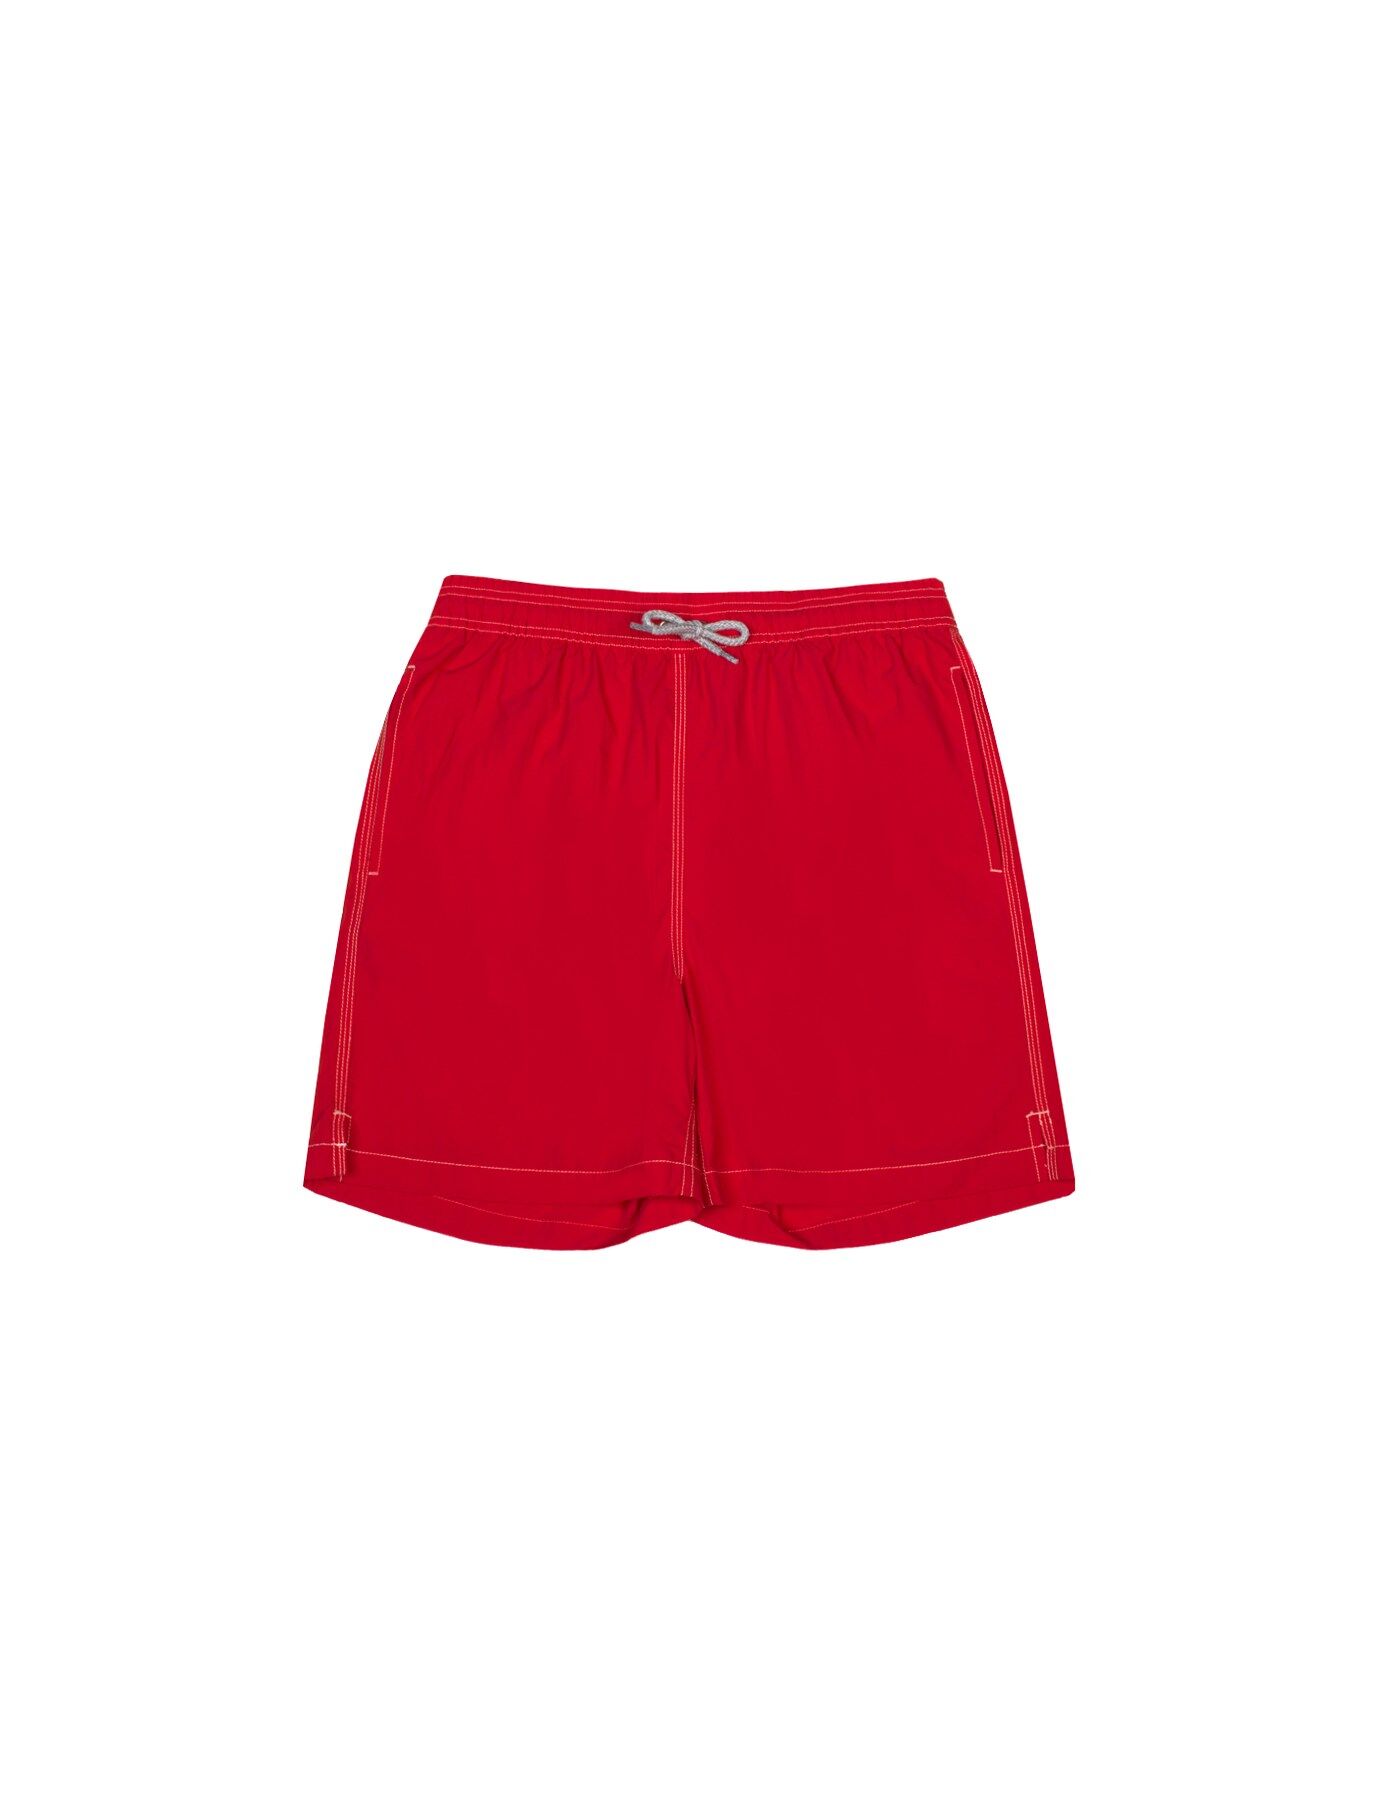 Hawes & Curtis Men's Garment Dye Swim Shorts in Red   Small